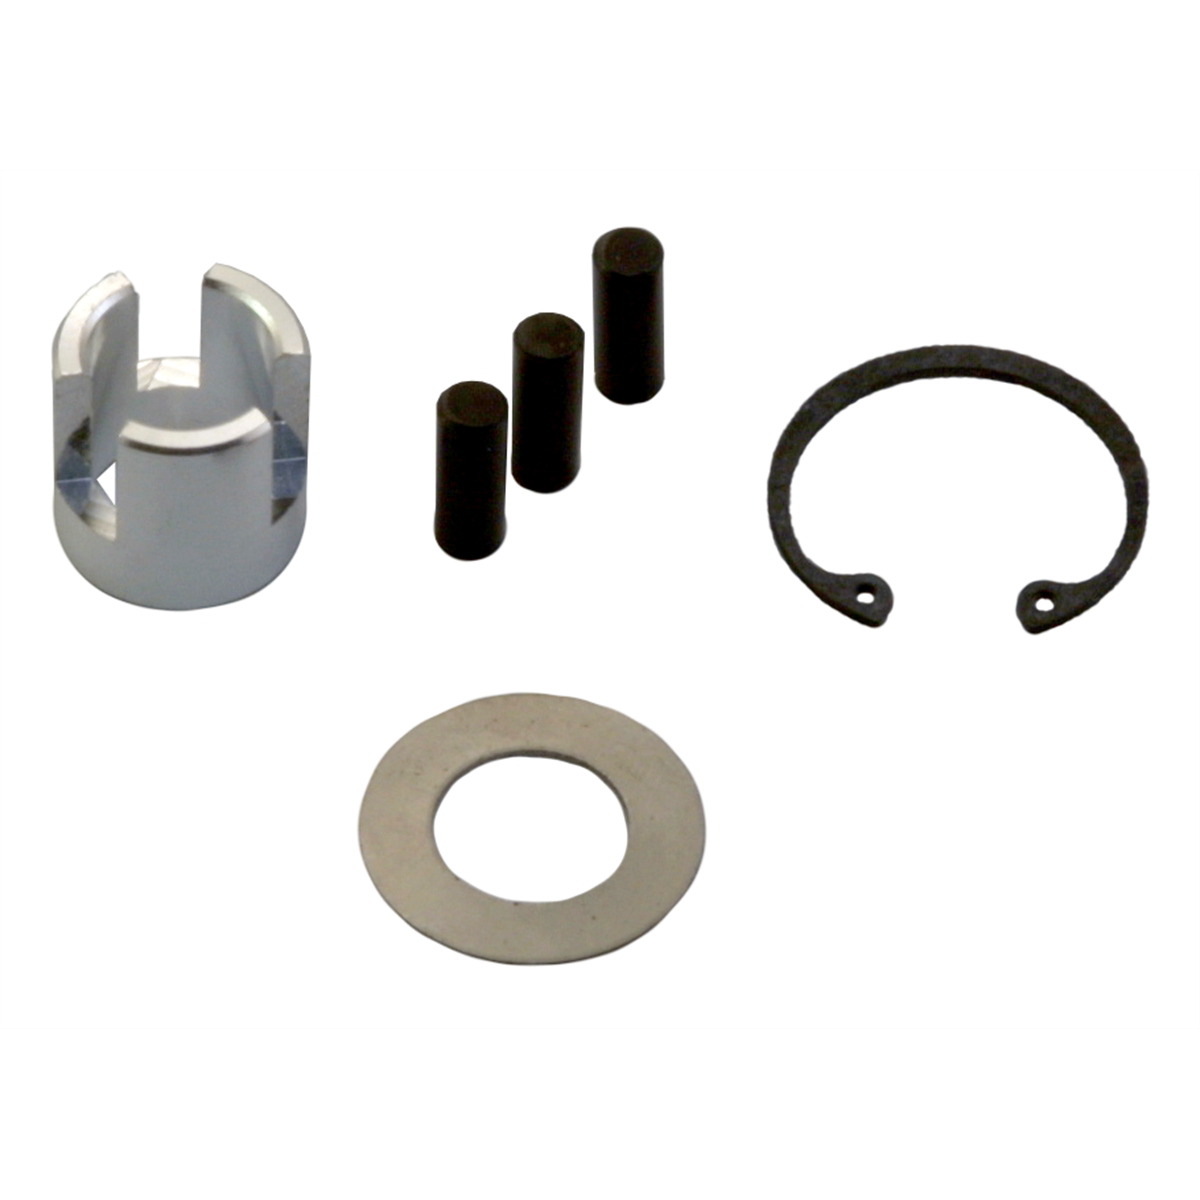 Internal Replacement Parts for 8MM Stud Remover/Puller Parts Kit